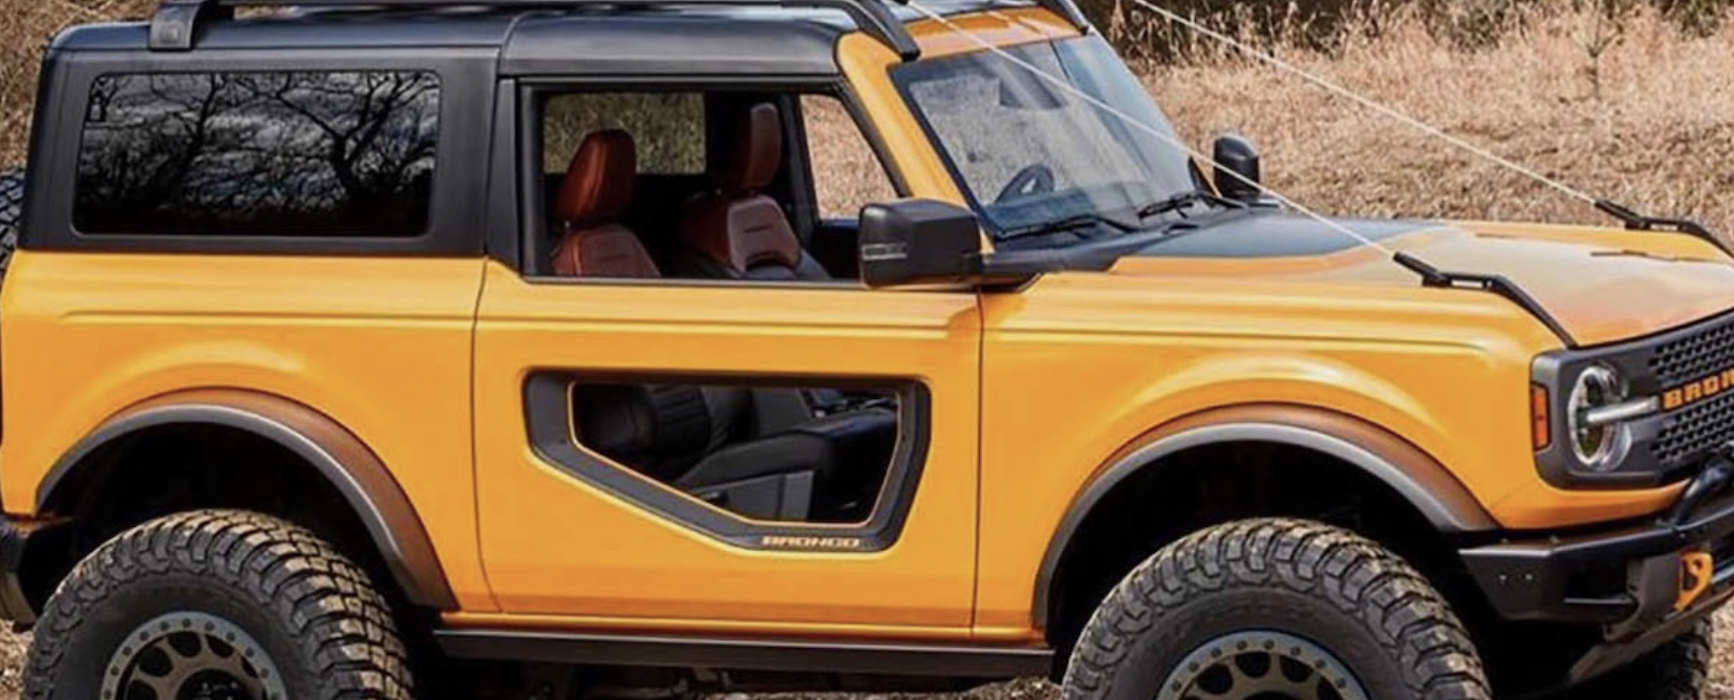 Ford Bronco Tube Doors Finally Available?! Screen Shot 2021-11-10 at 8.55.24 AM